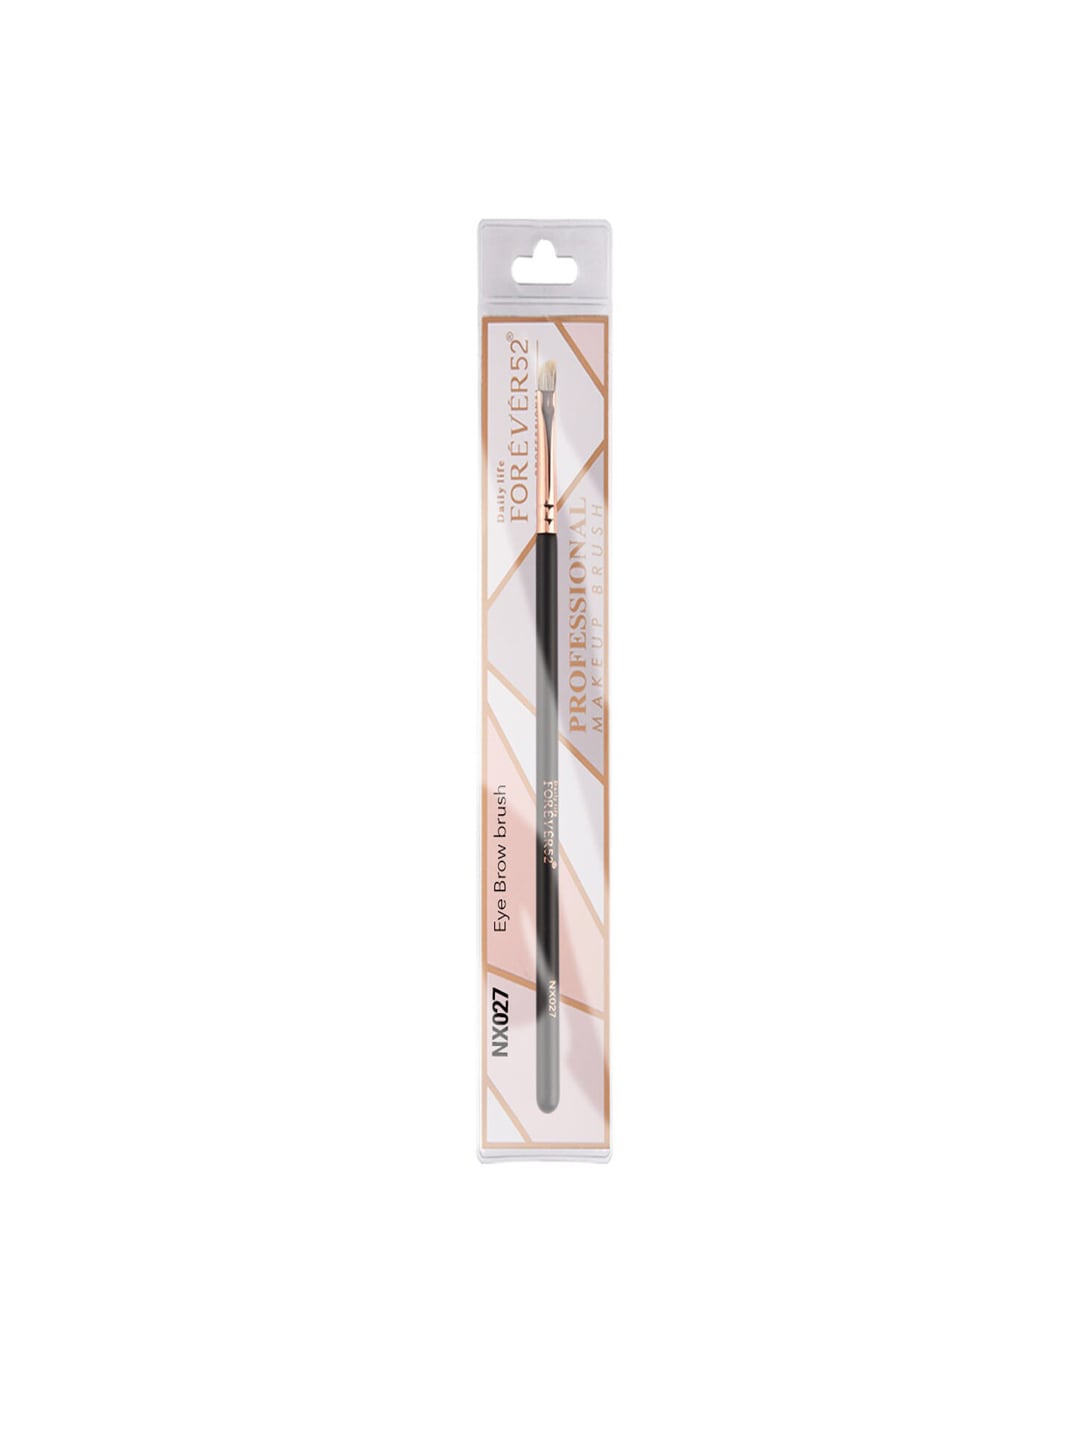 Daily Life Forever52 eye brow brush NX027 Price in India